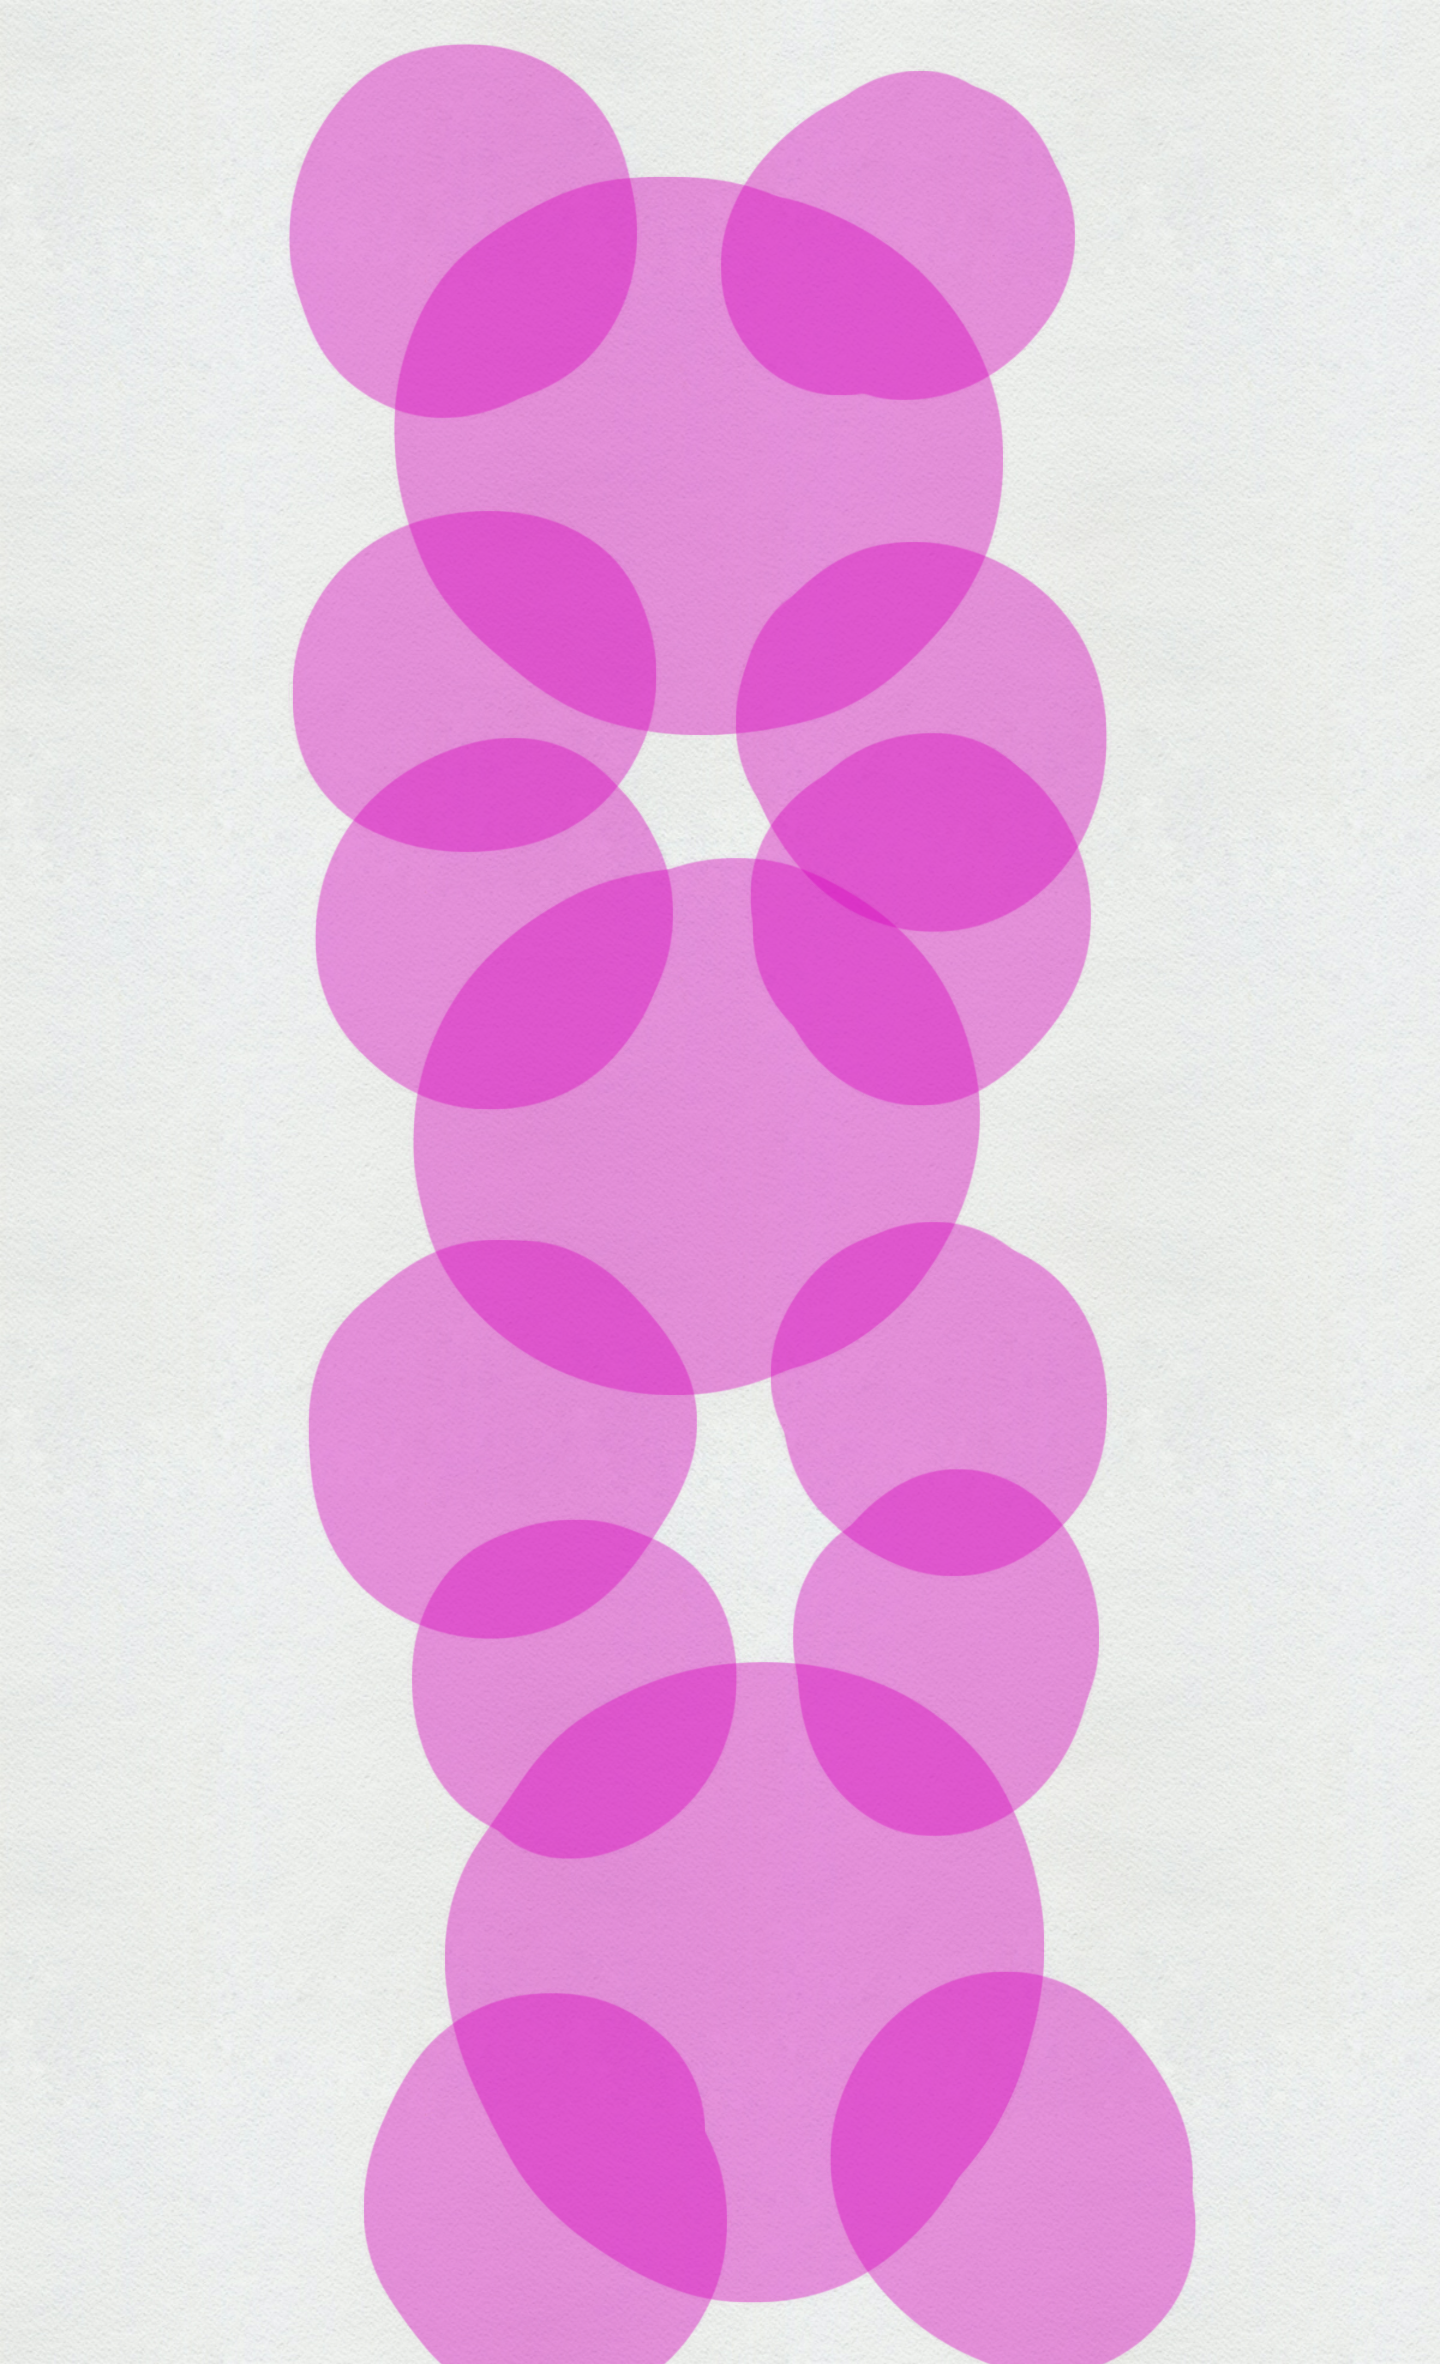 General 1440x2364 digital art abstract minimalism simple background pink dots white background